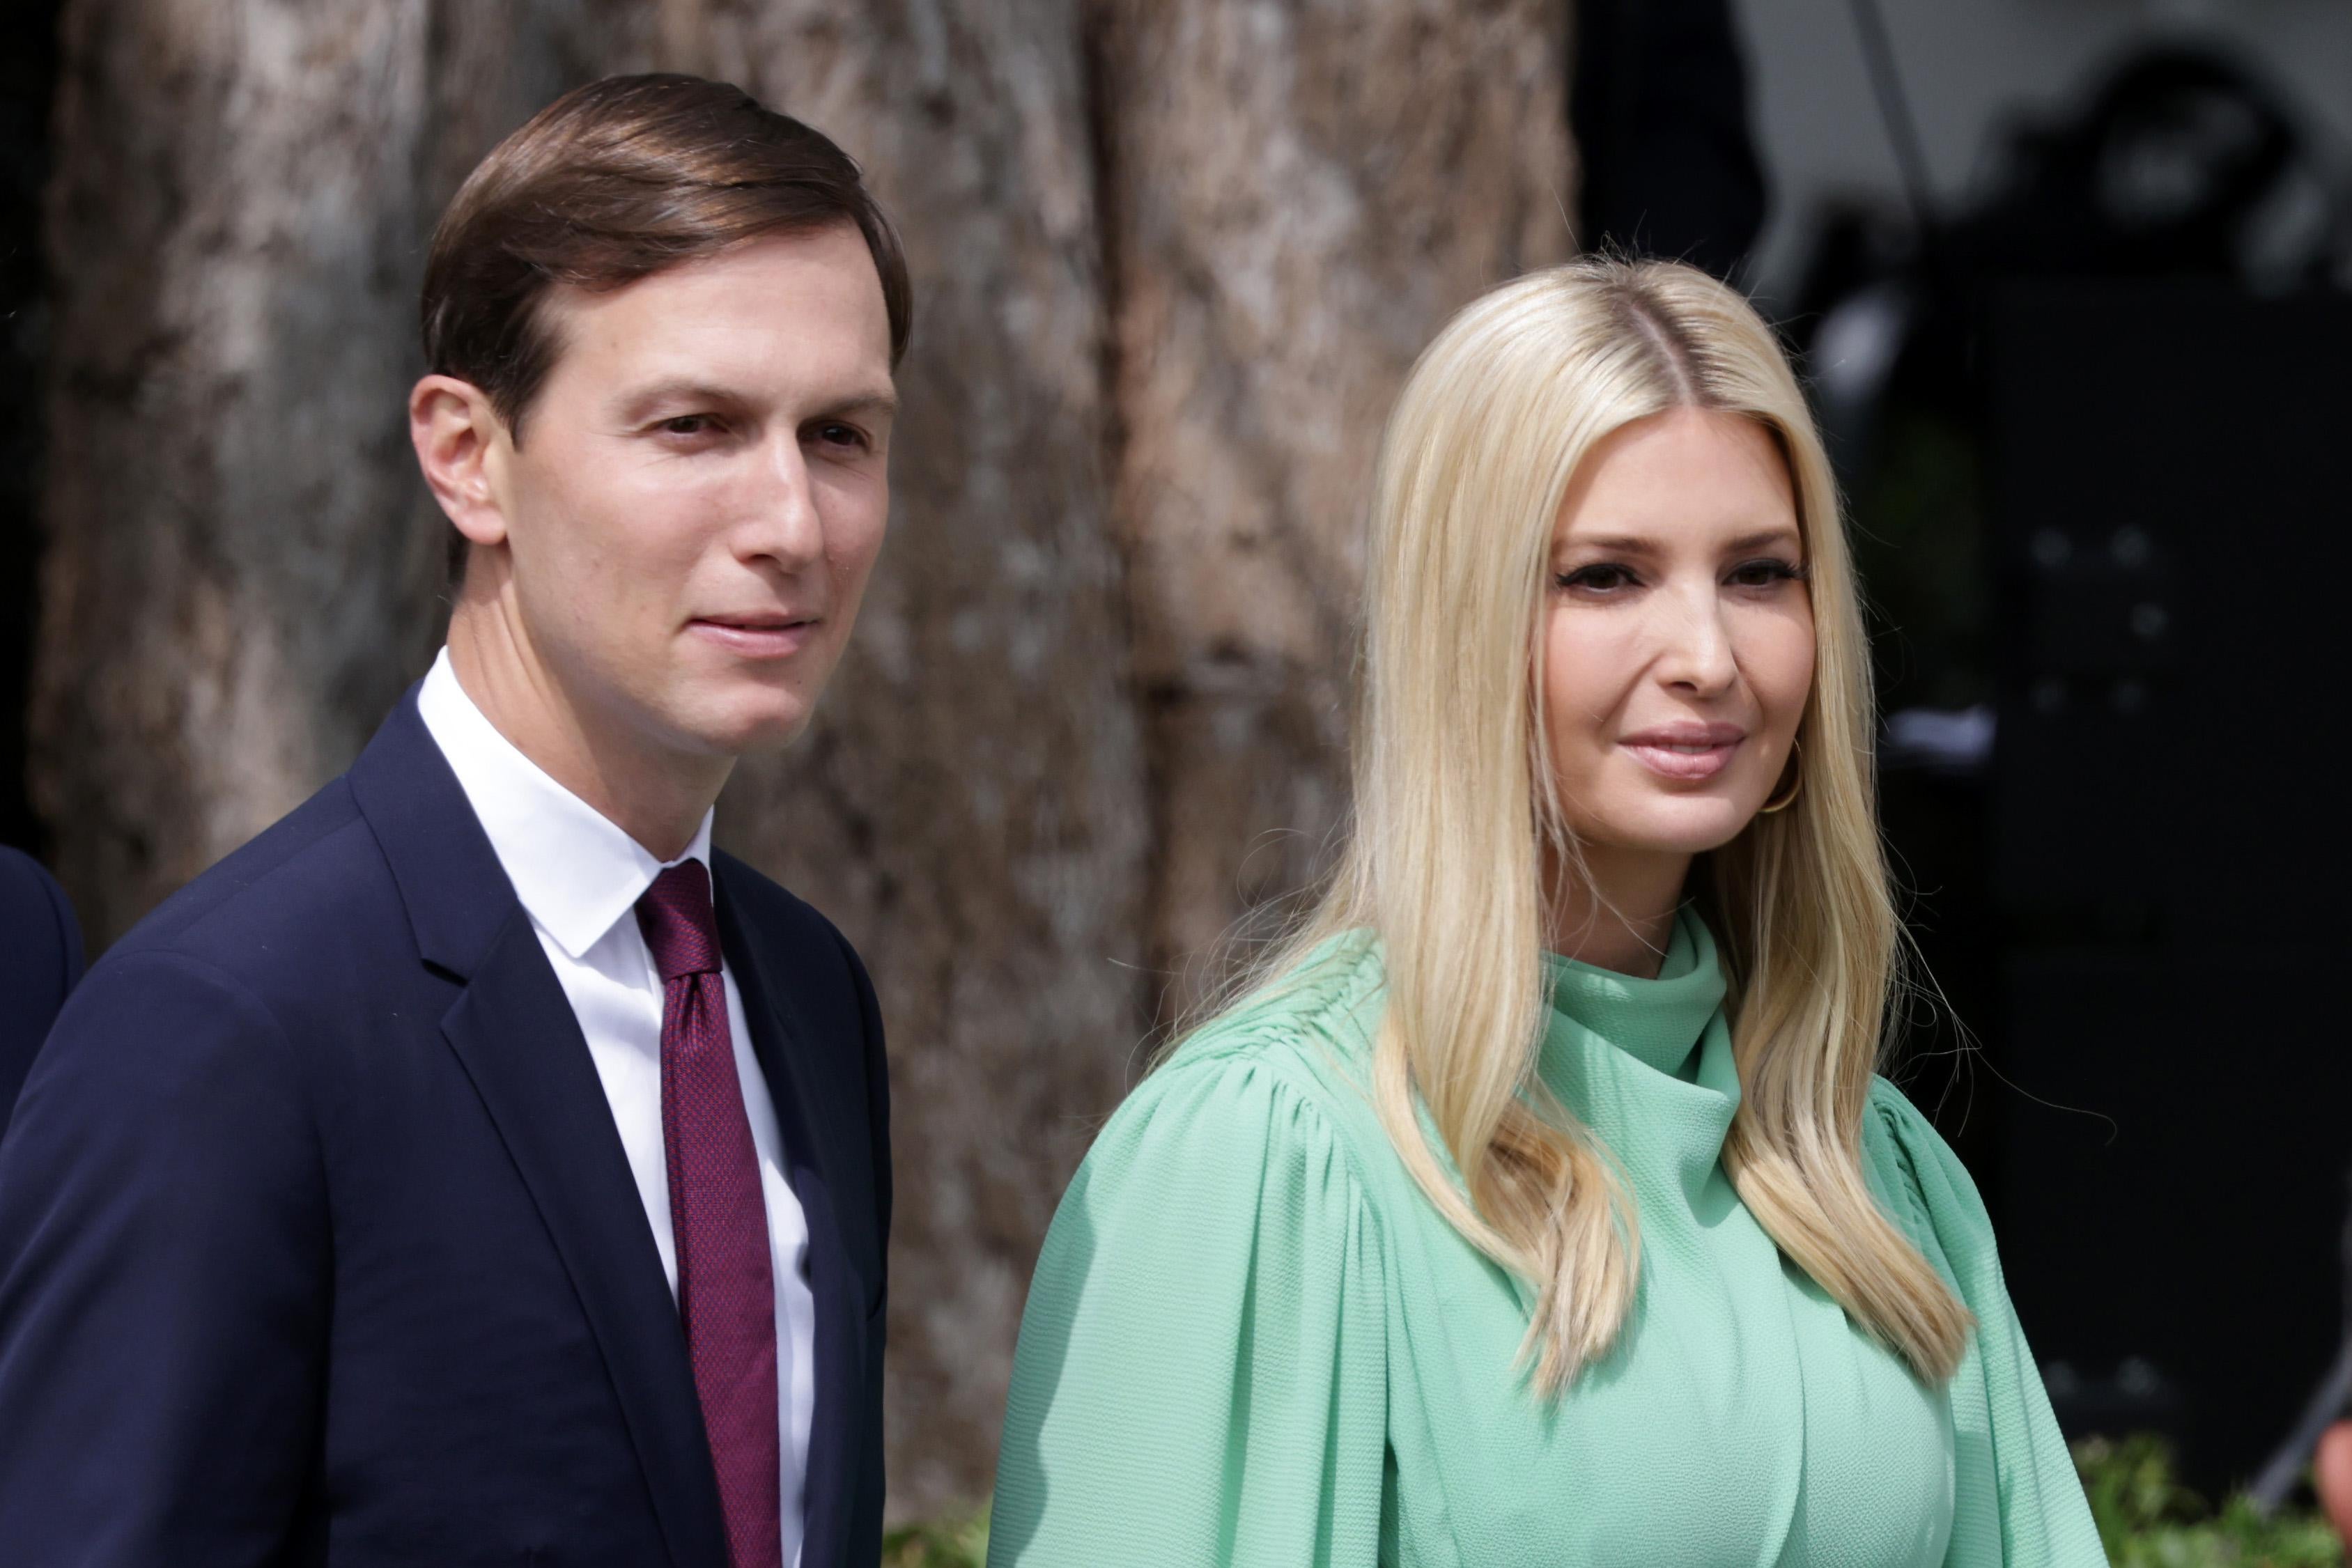 Jared Kushner and Ivanka Trump smiling, dressed up for an event on the South Lawn